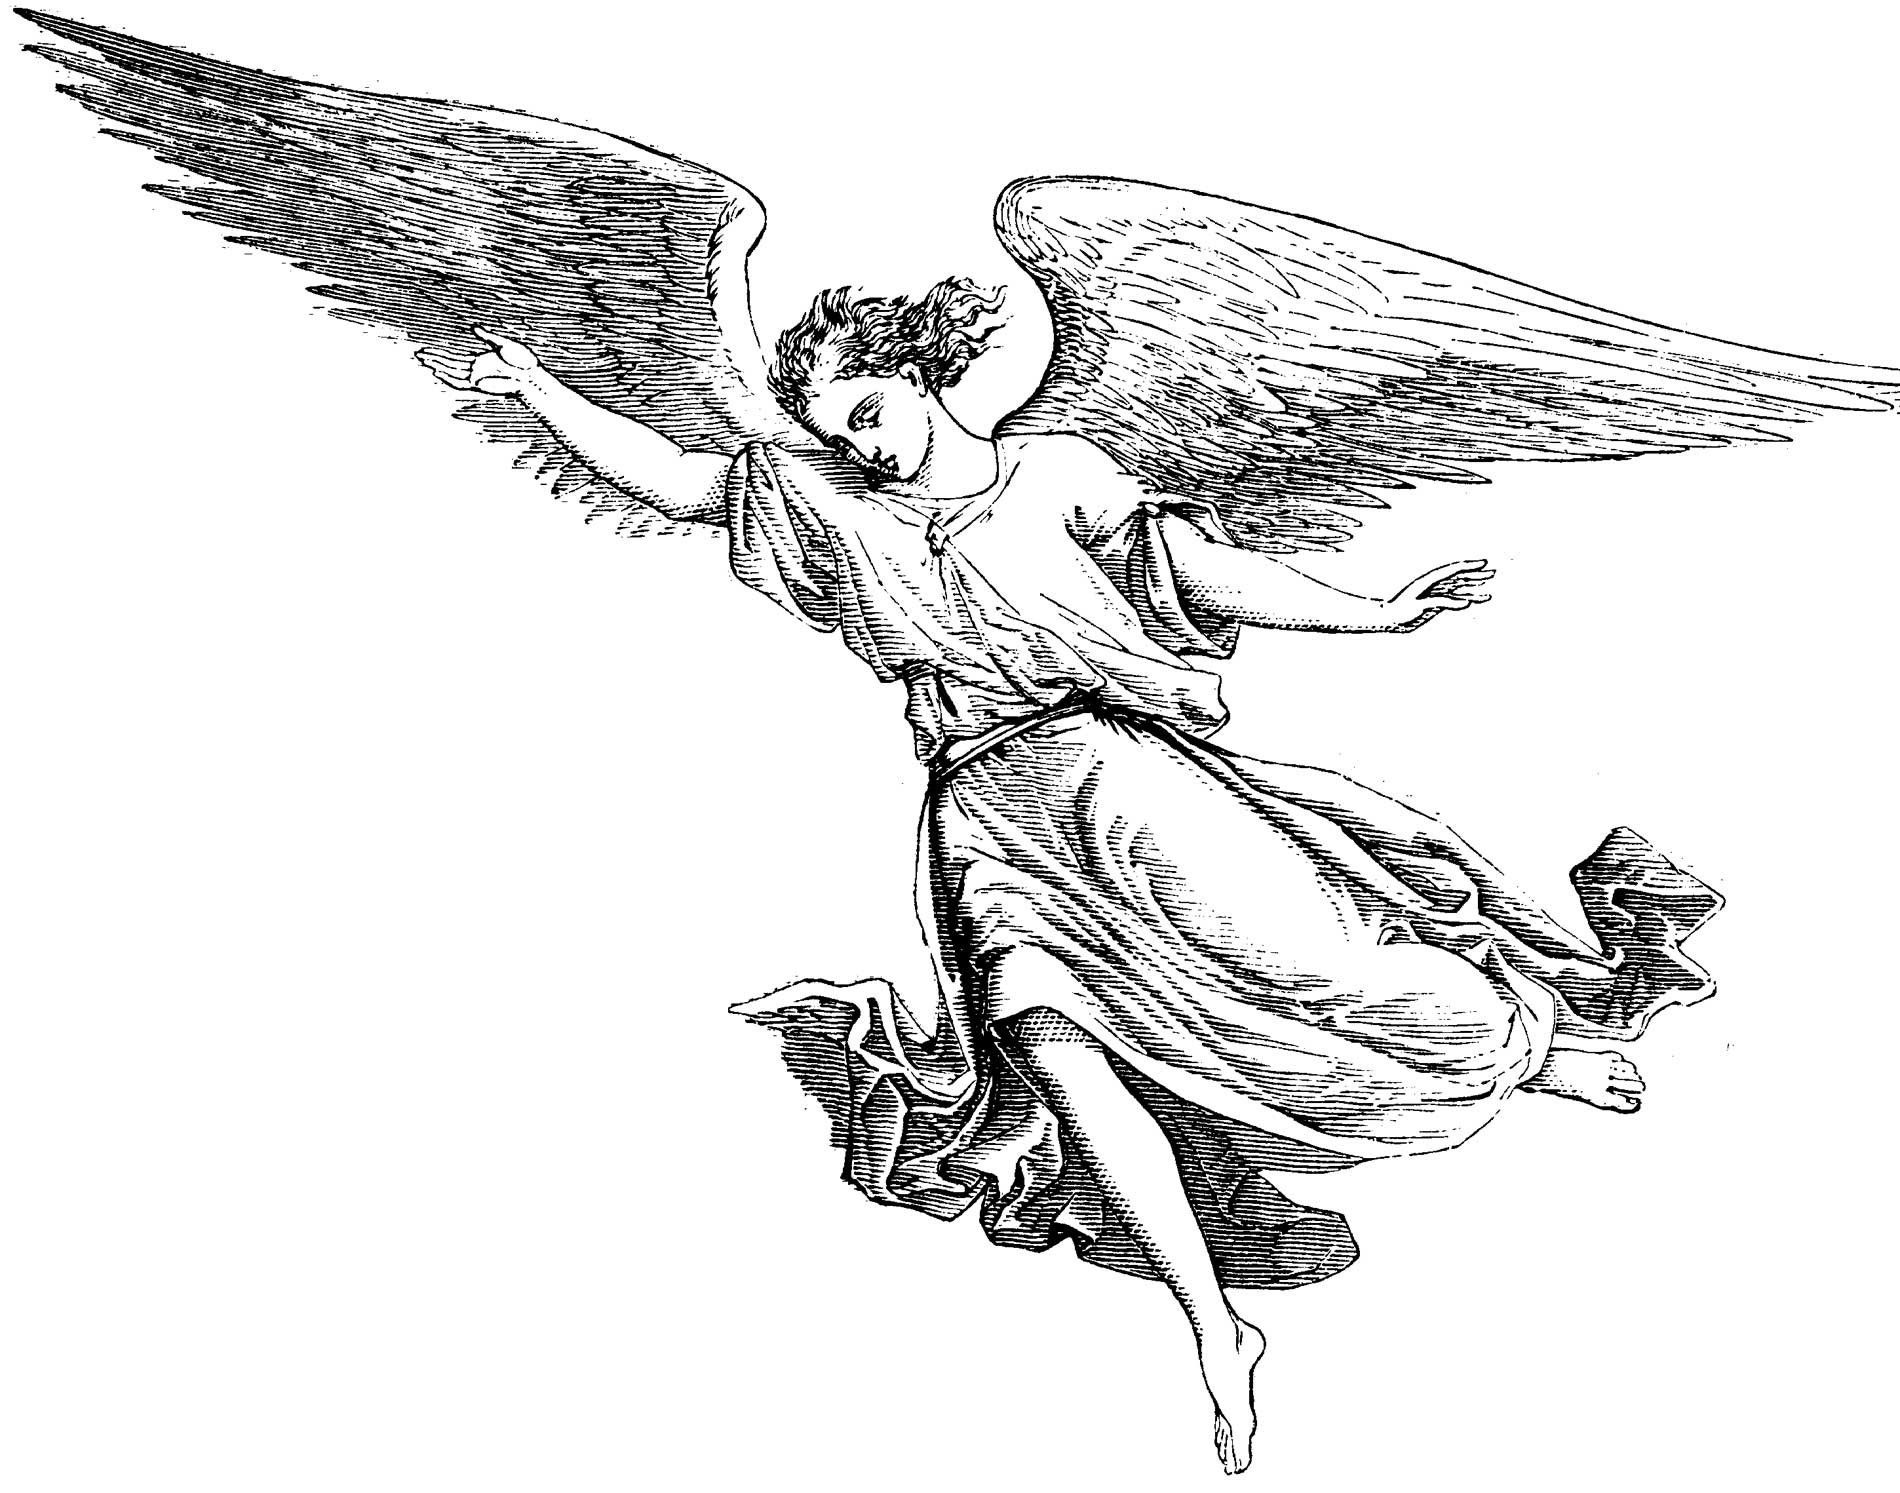 Angel For Adults - Coloring Pages for Kids and for Adults